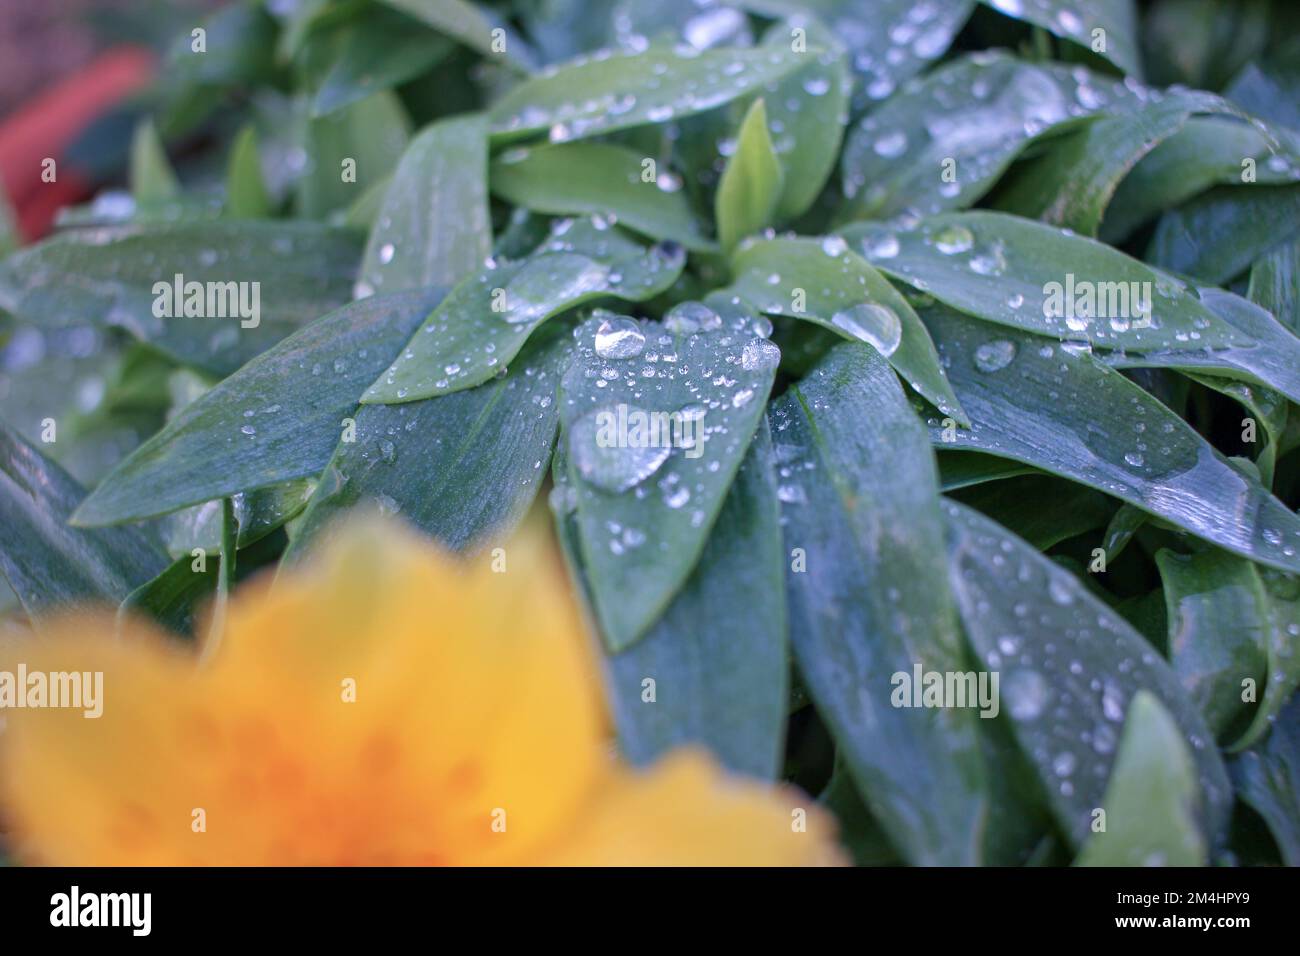 plants in my garden with plenty of drops of water on their leaves after rain Stock Photo